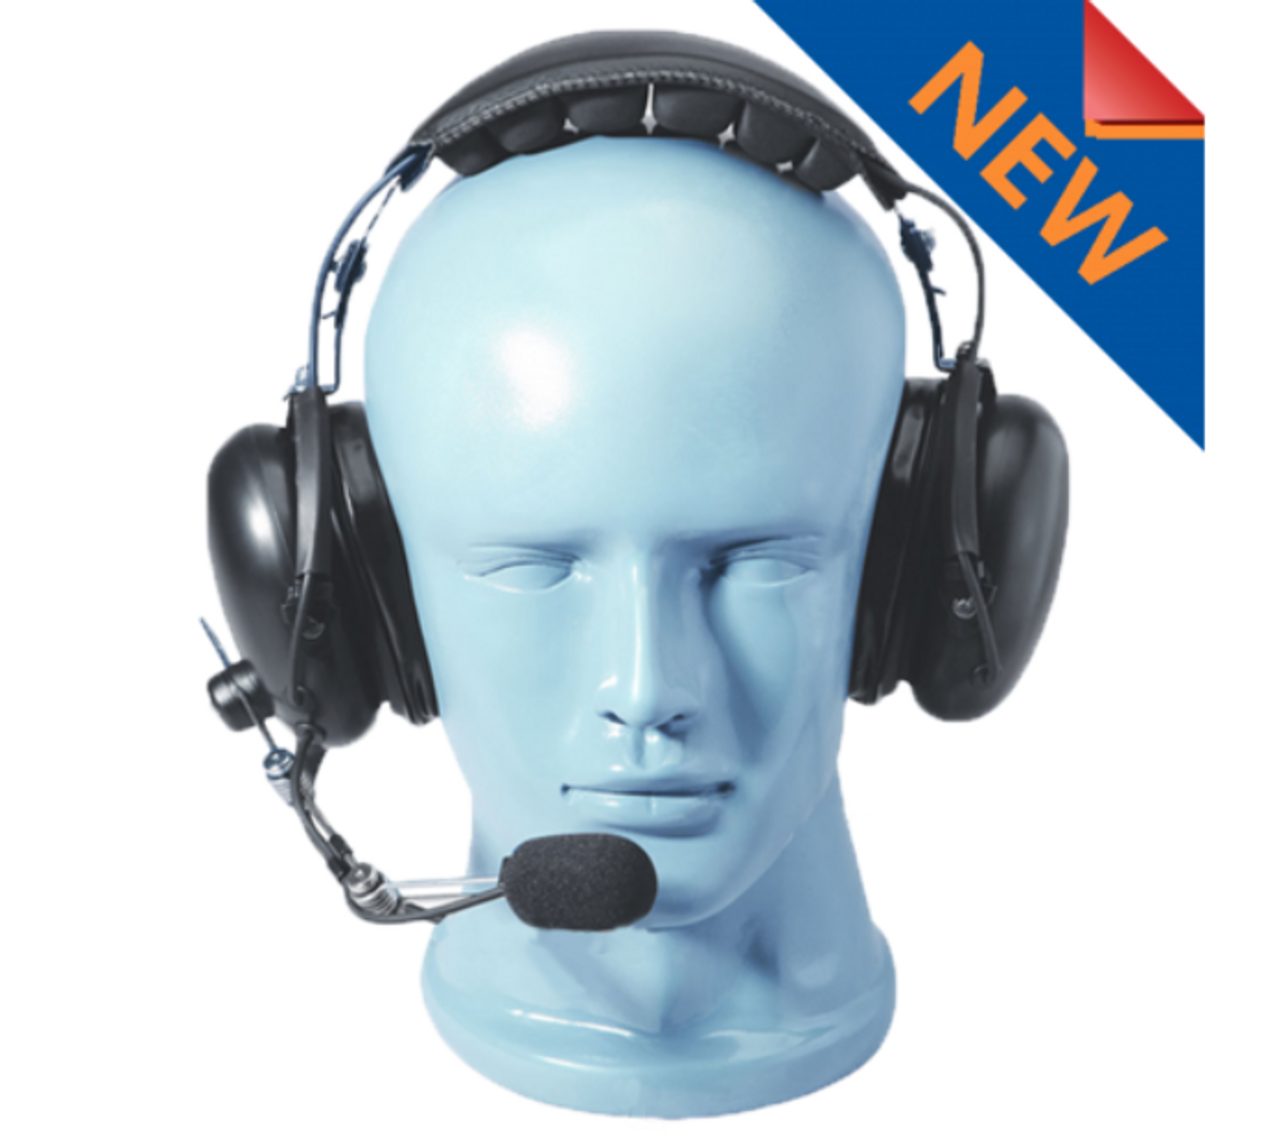 National 2 Way Dual Muff Headset with Noise Canceling Microphone